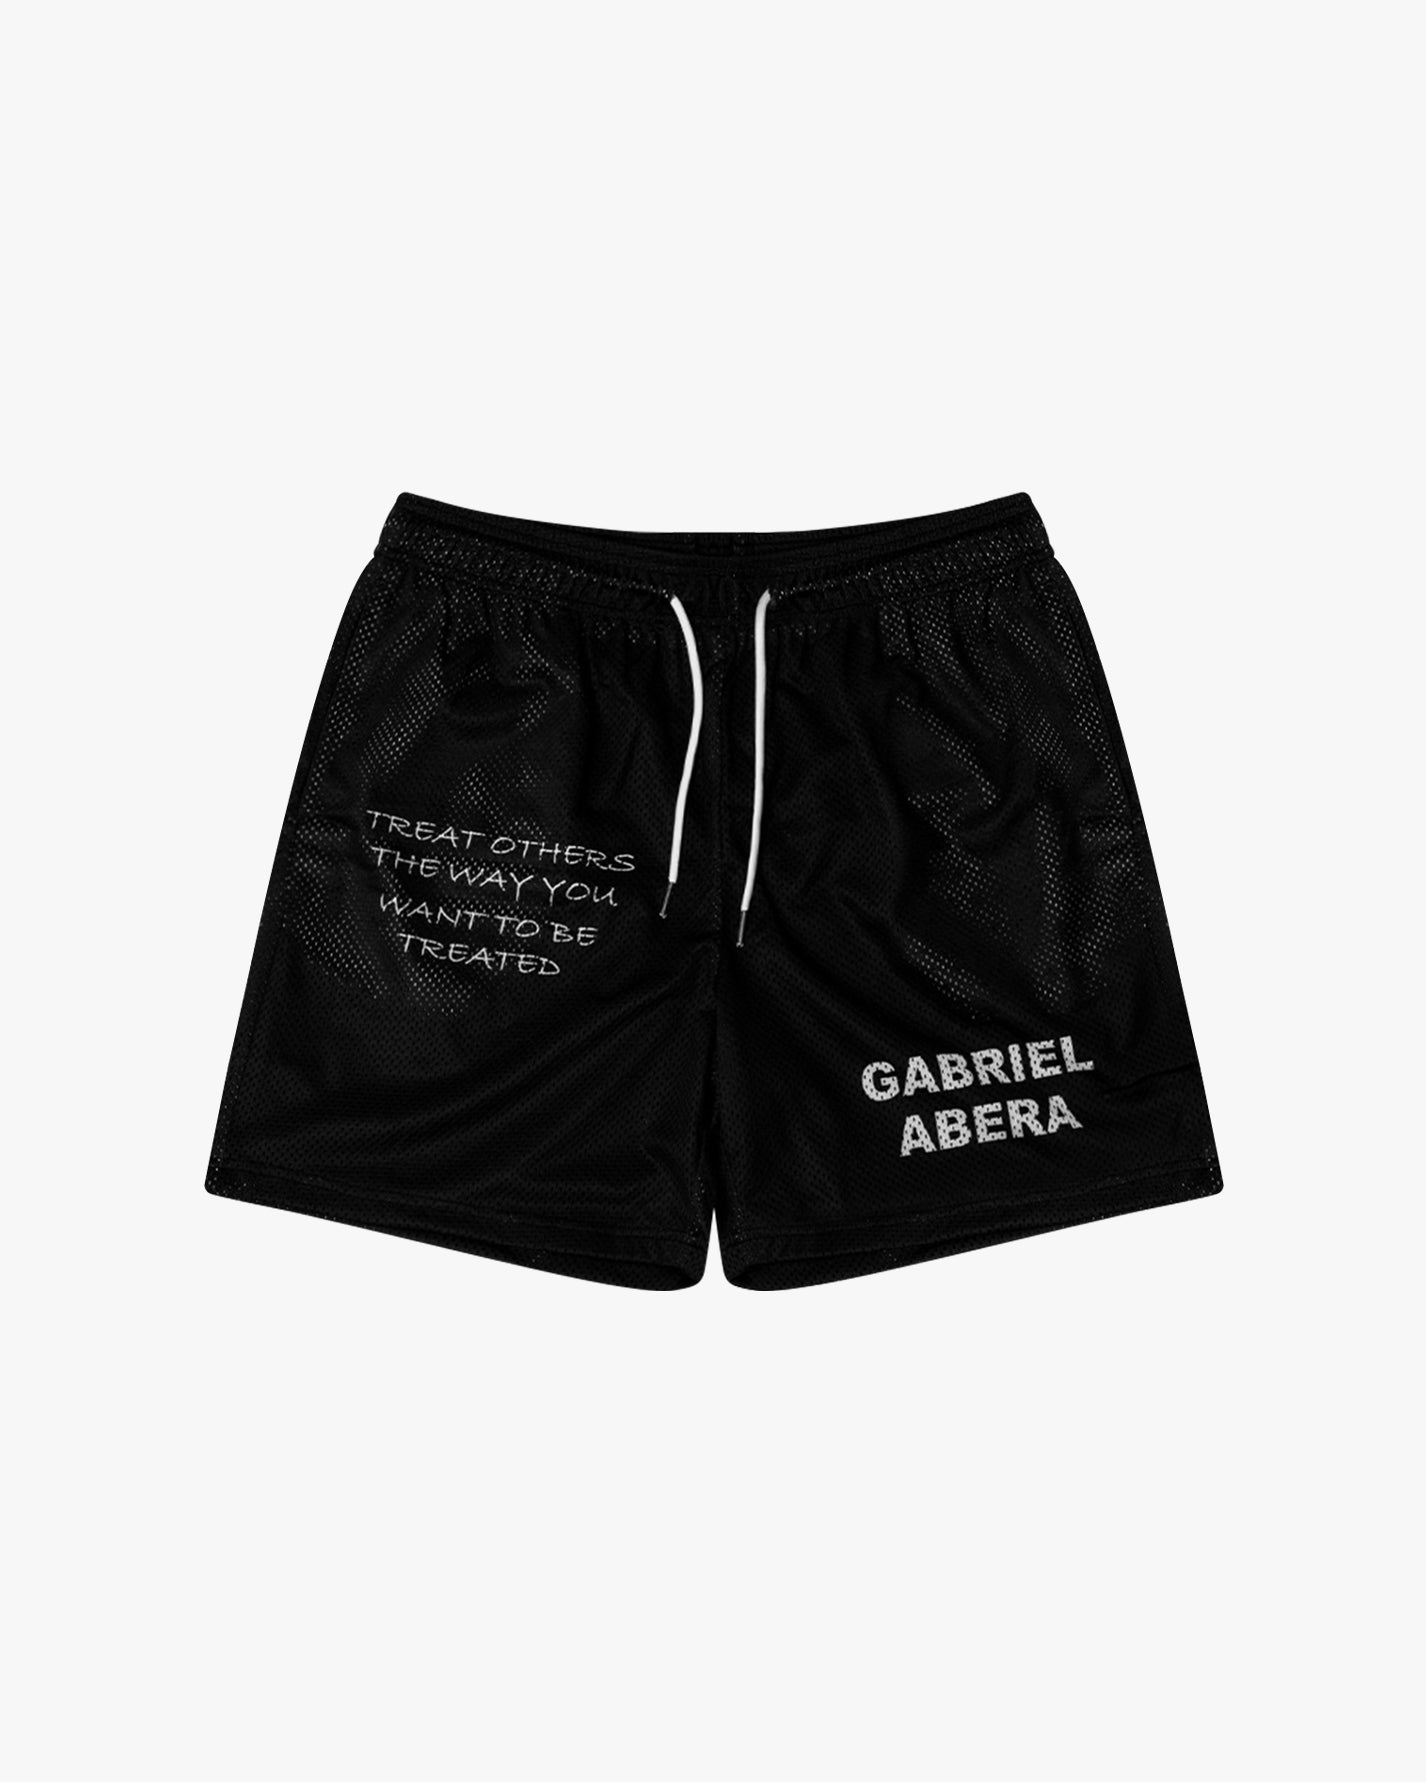 Black mesh shorts with statement print and brandname on the front